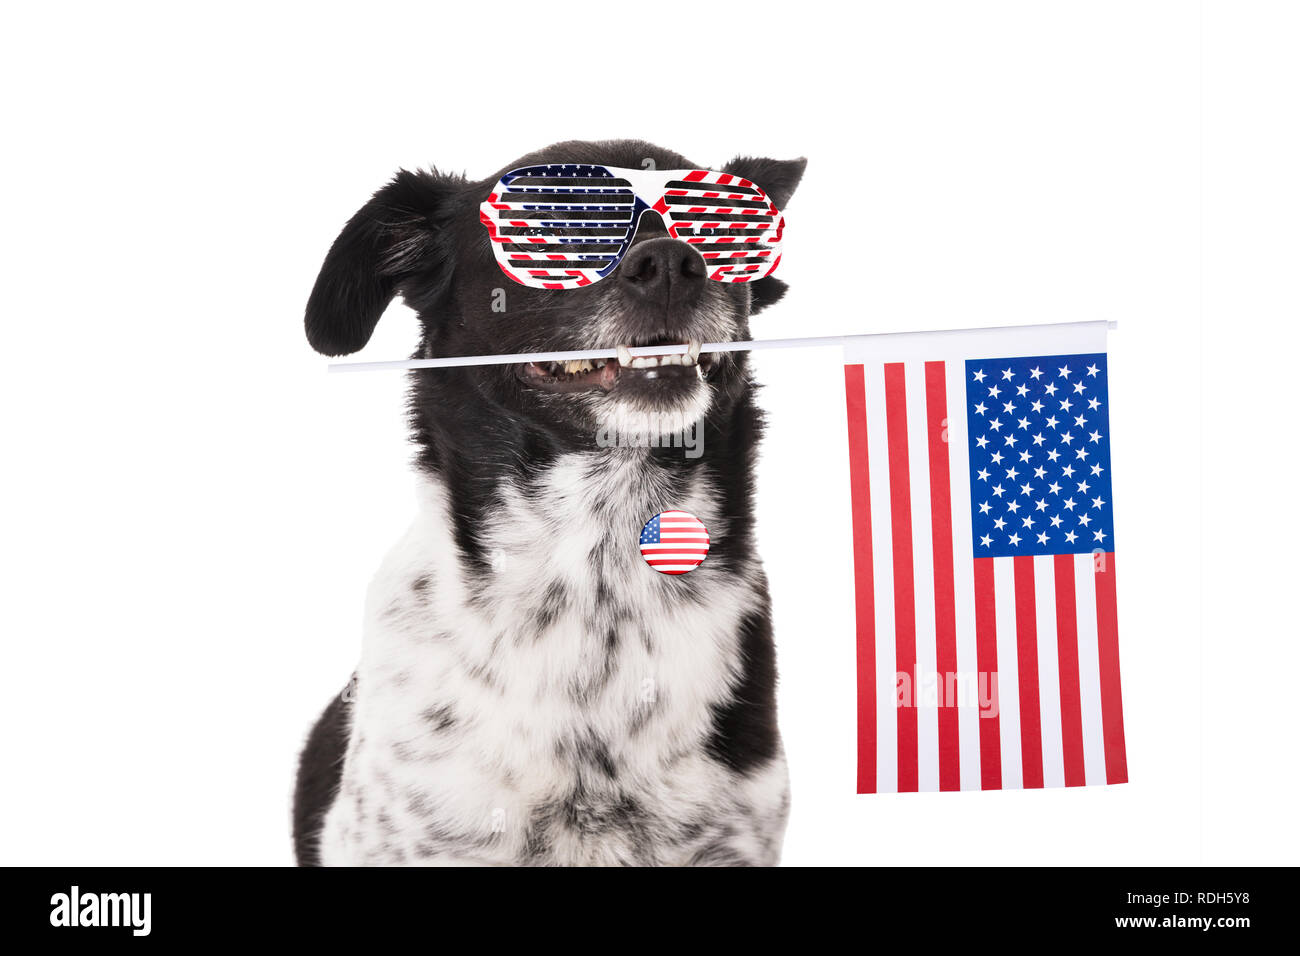 Portrait Of A Dog Holding American Flag In His Mouth Over White Background Stock Photo